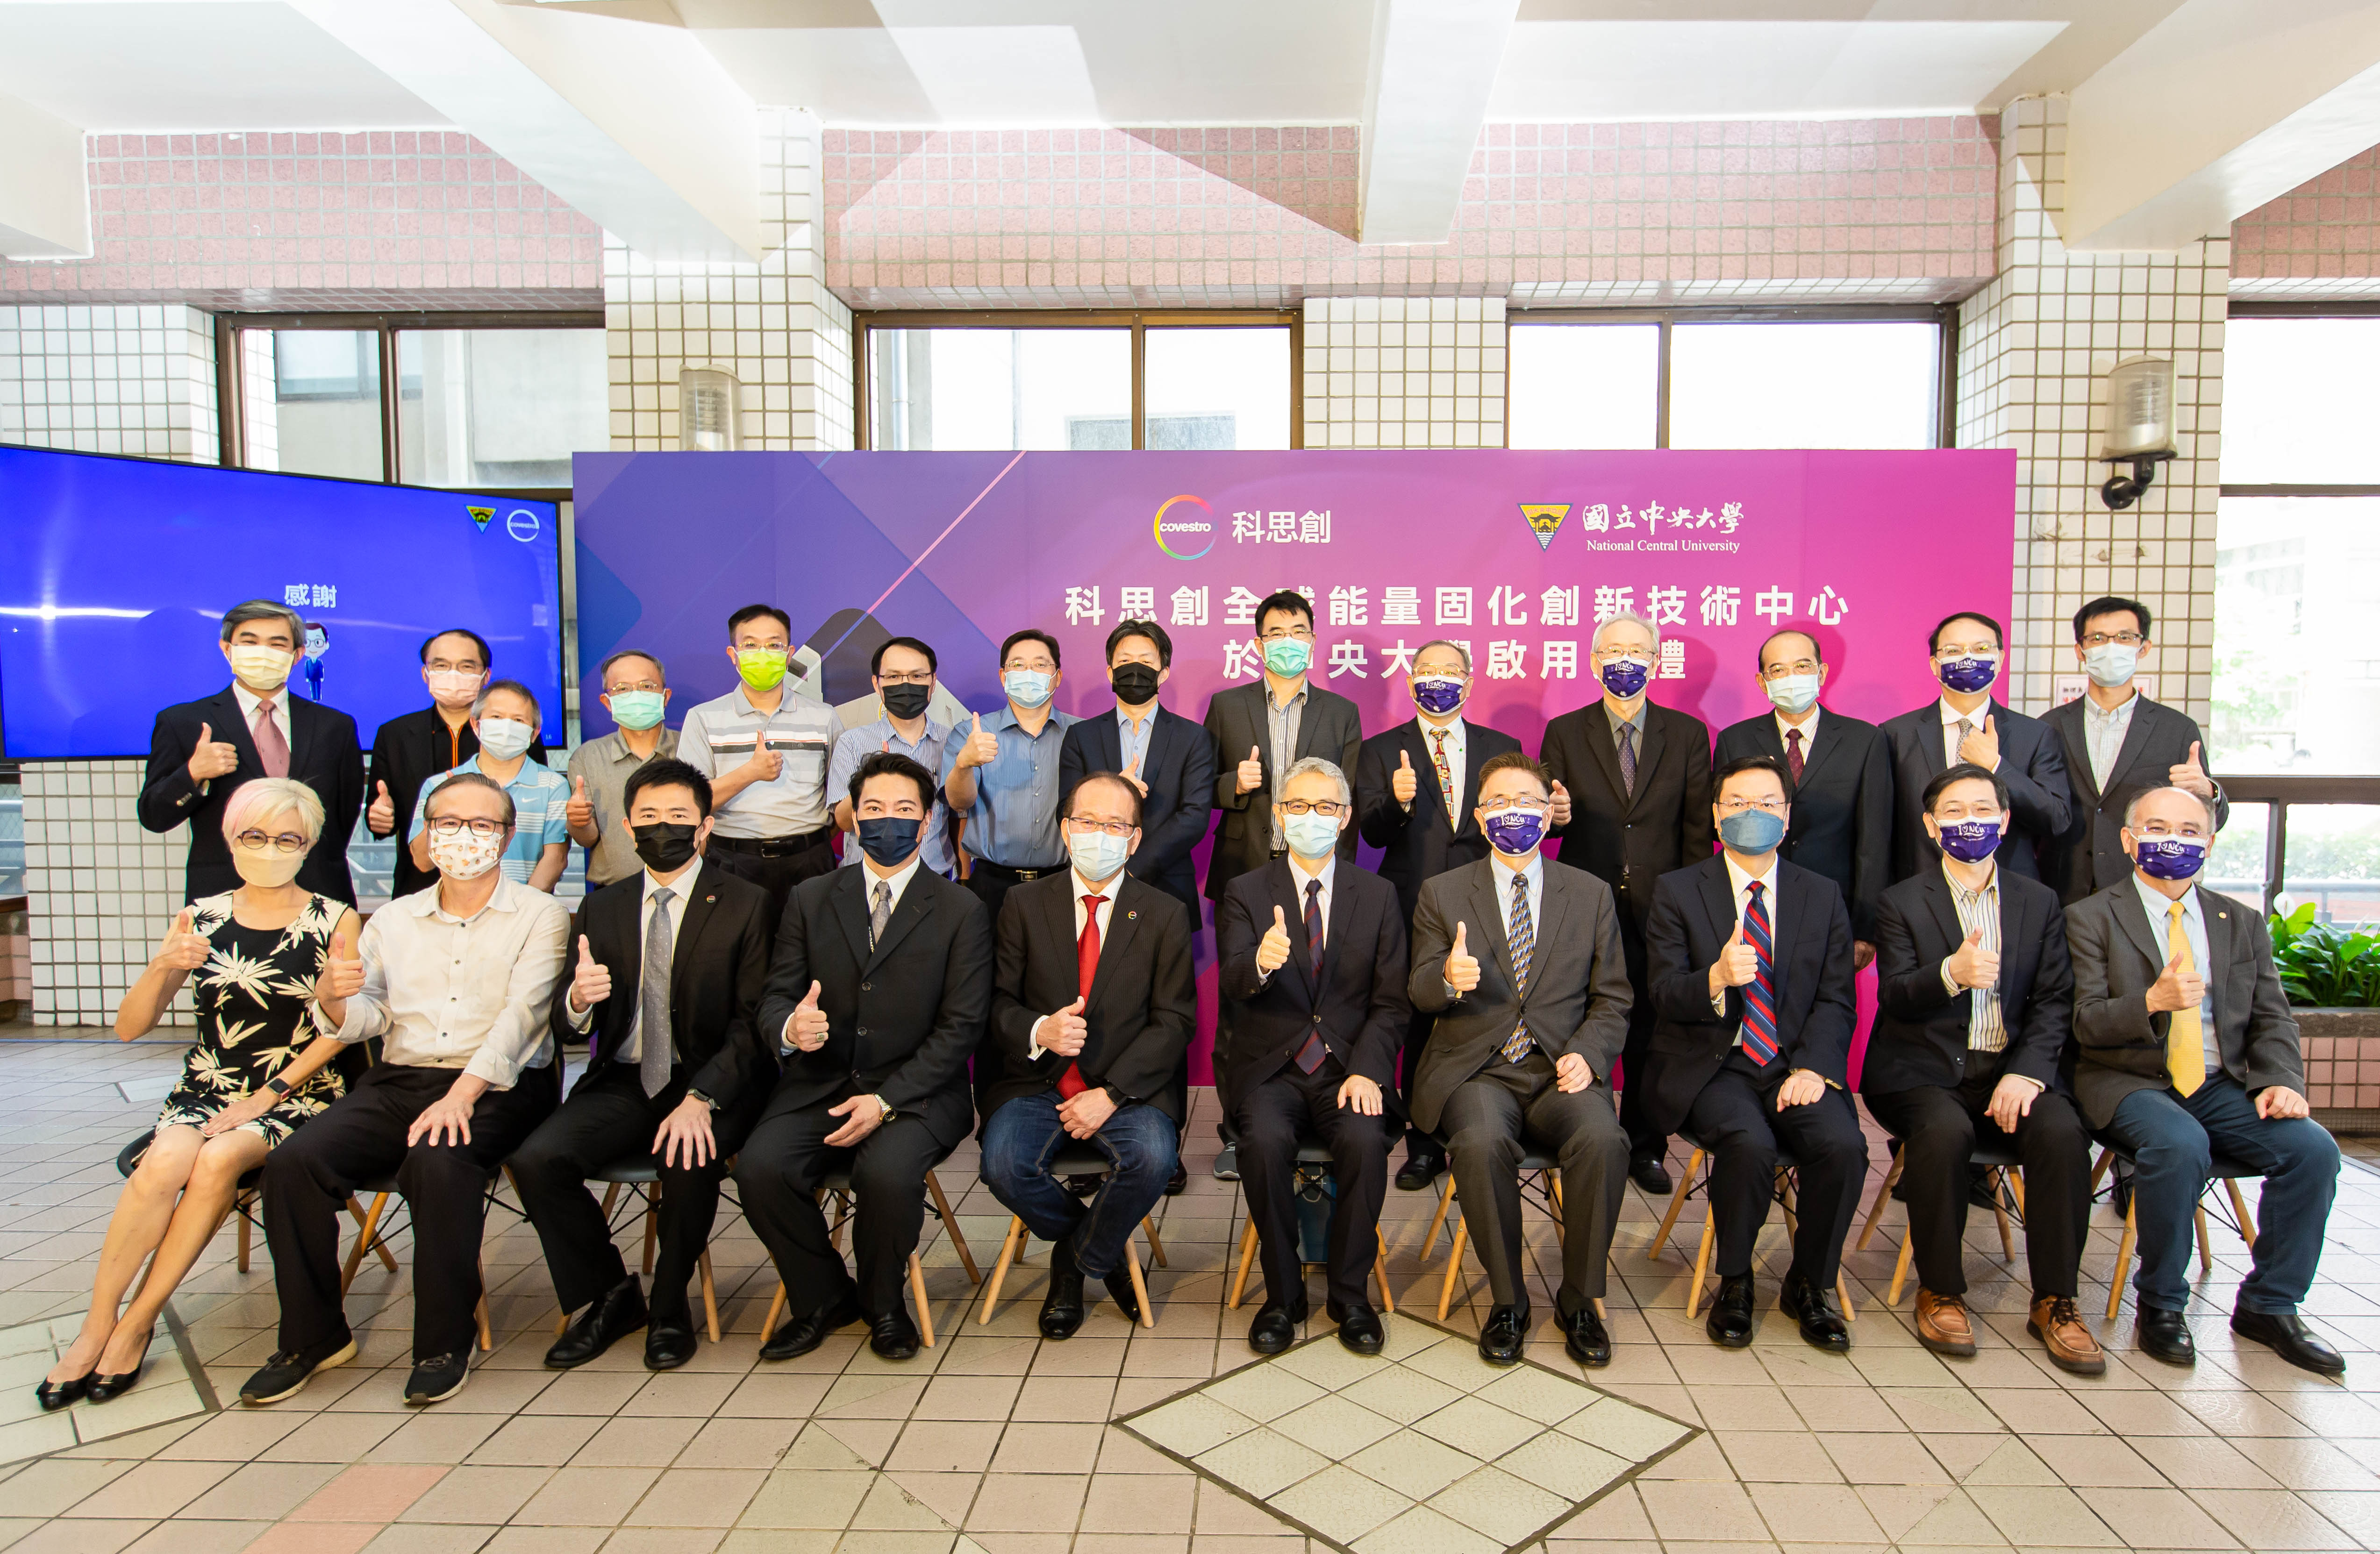 Prominent guests gathered at the opening ceremony. The faculty of NCU and the precious guests from Covestro took a group photo, witnessing this extraordinary moment together. Photo by Kuo Shih-Sheng